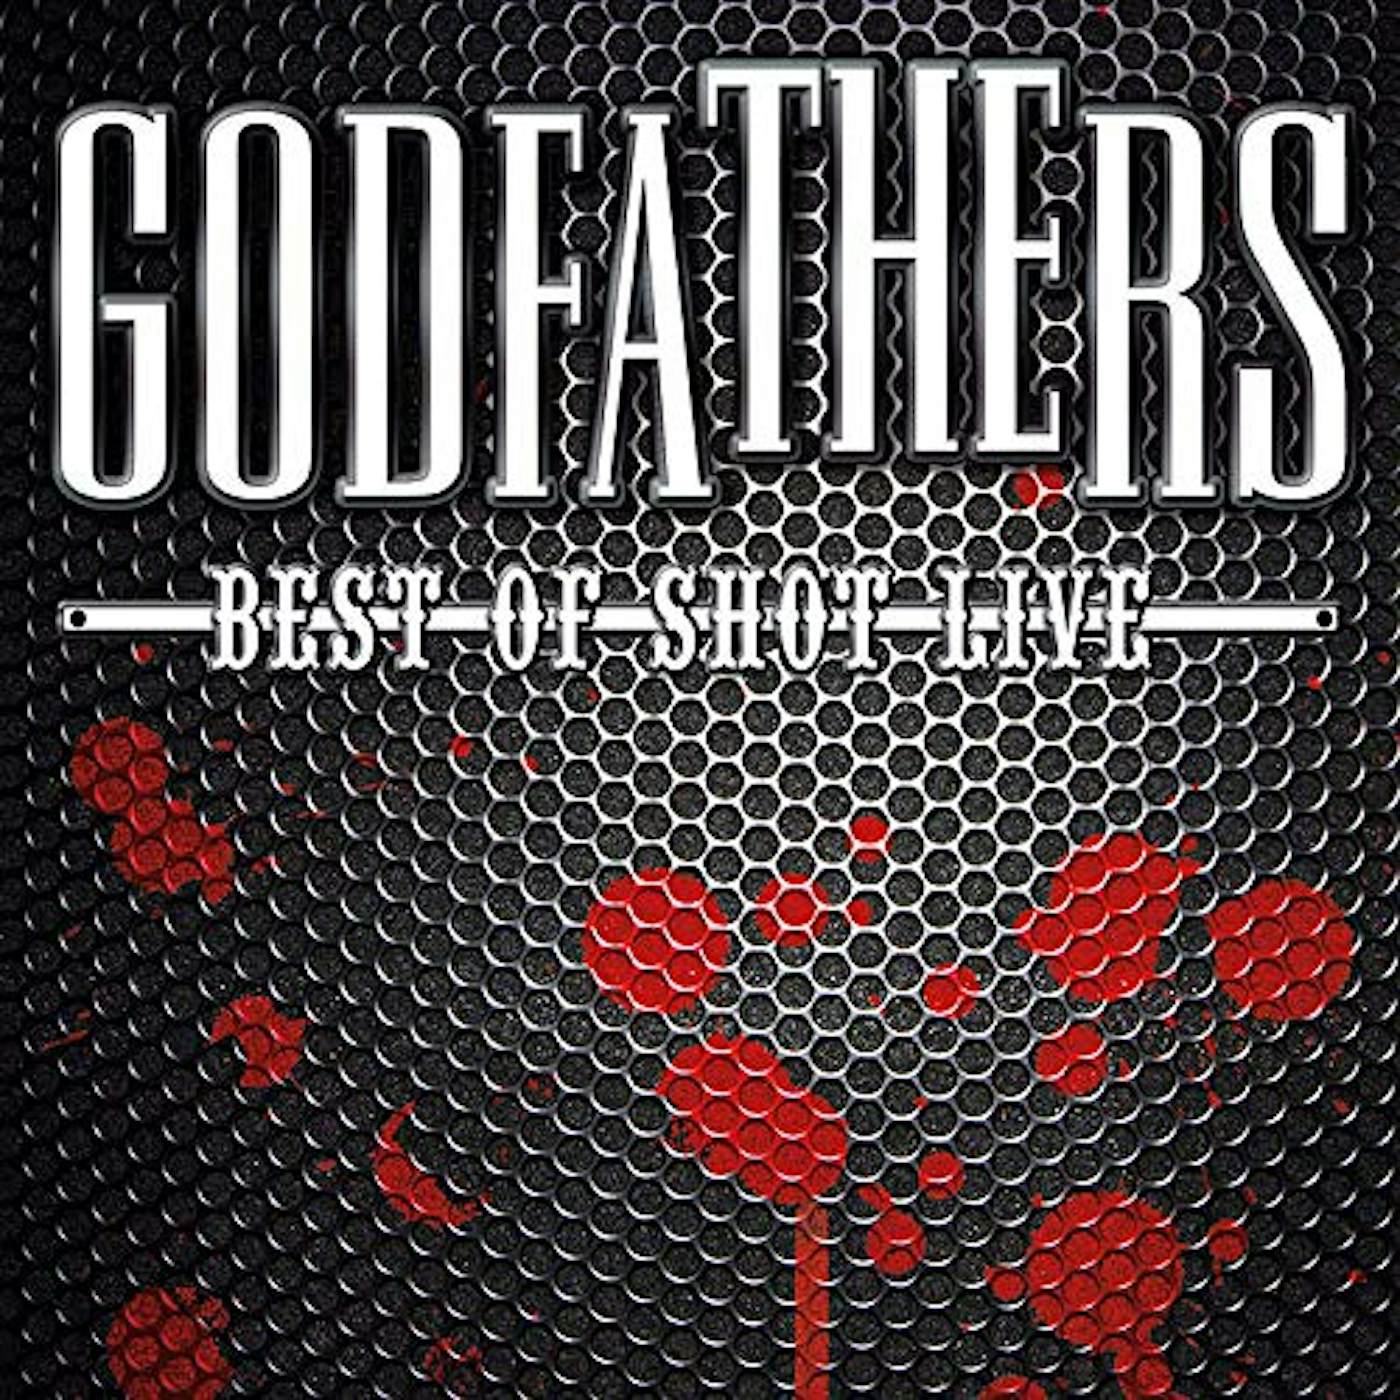 The Godfathers Best of Shot Live Vinyl Record